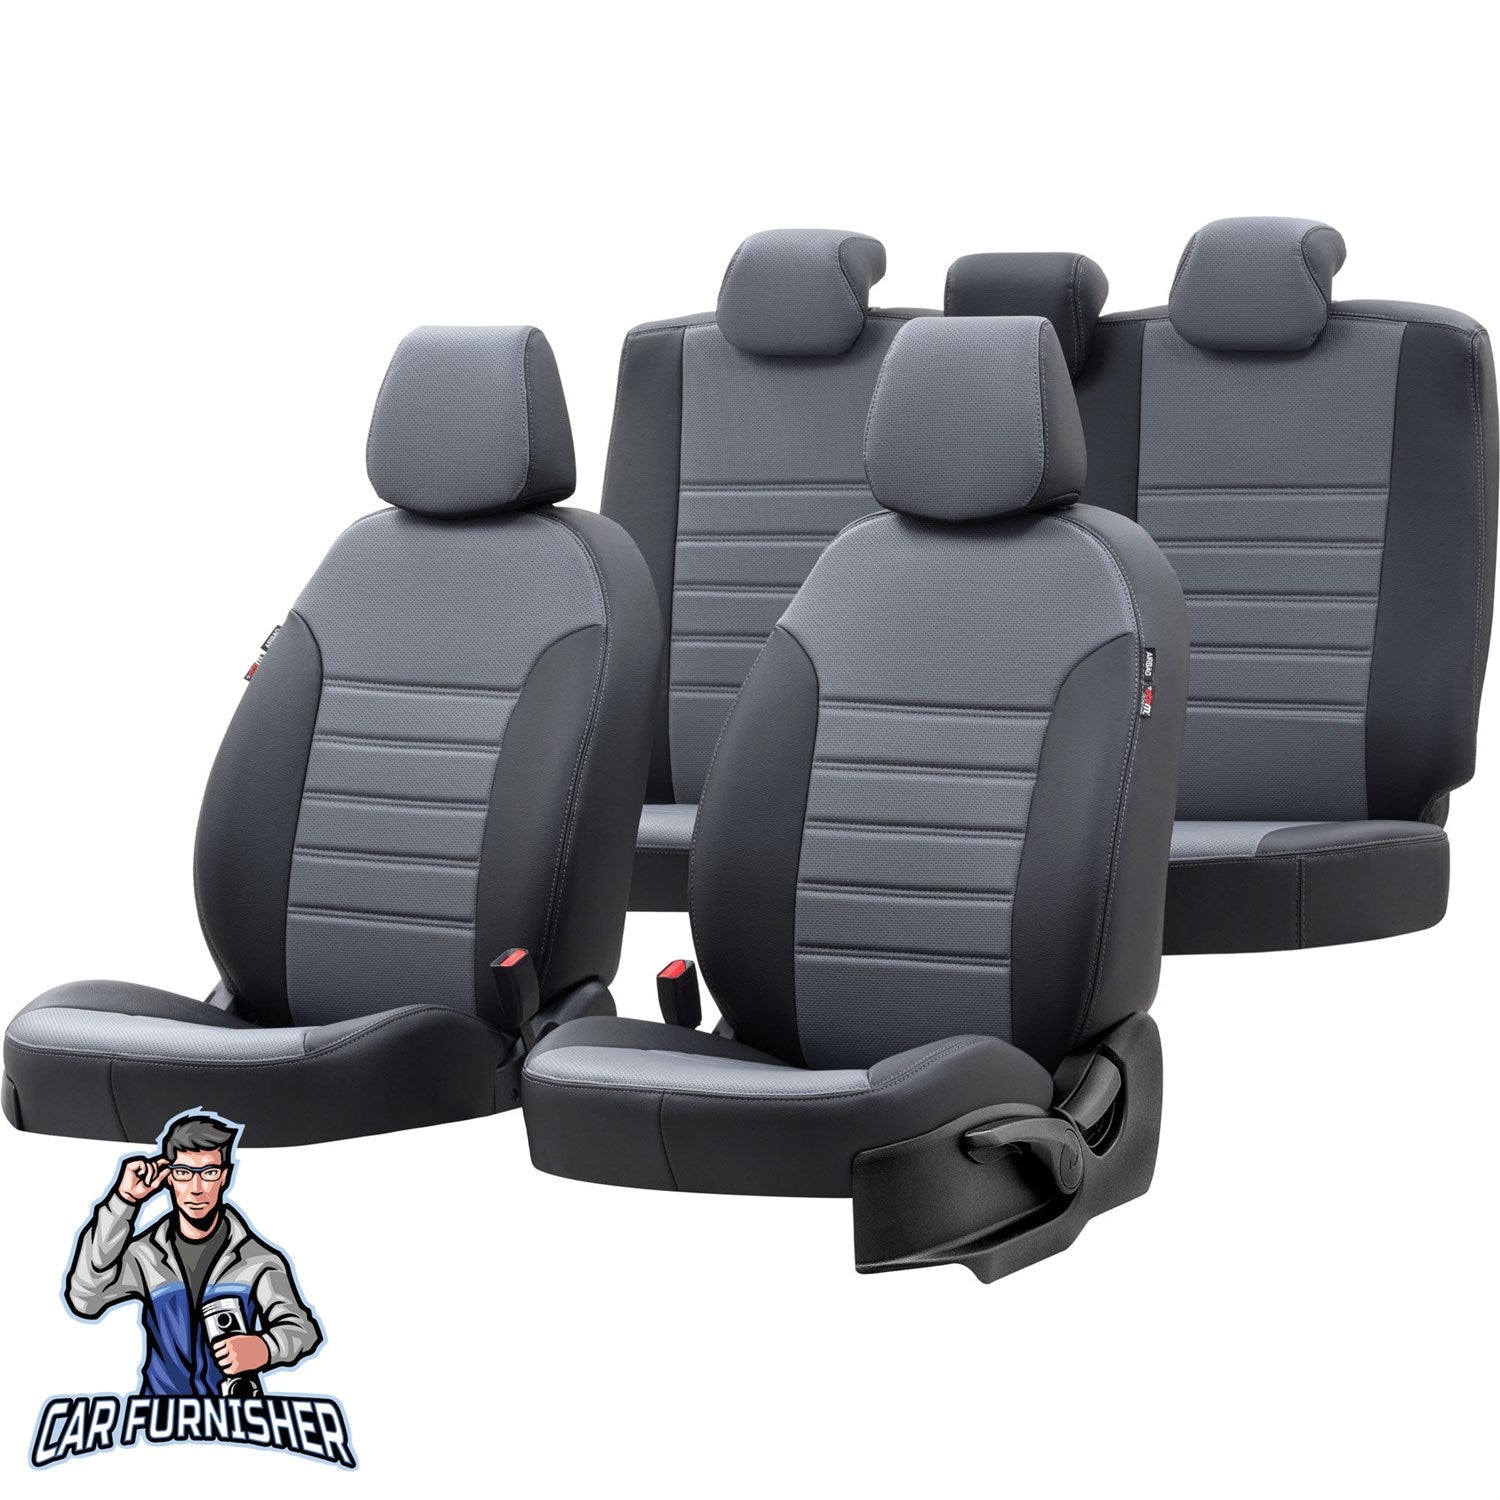 Peugeot 301 Car Seat Covers 2012-2023 New York Design Smoked Black Full Set (5 Seats + Handrest) Leather & Fabric